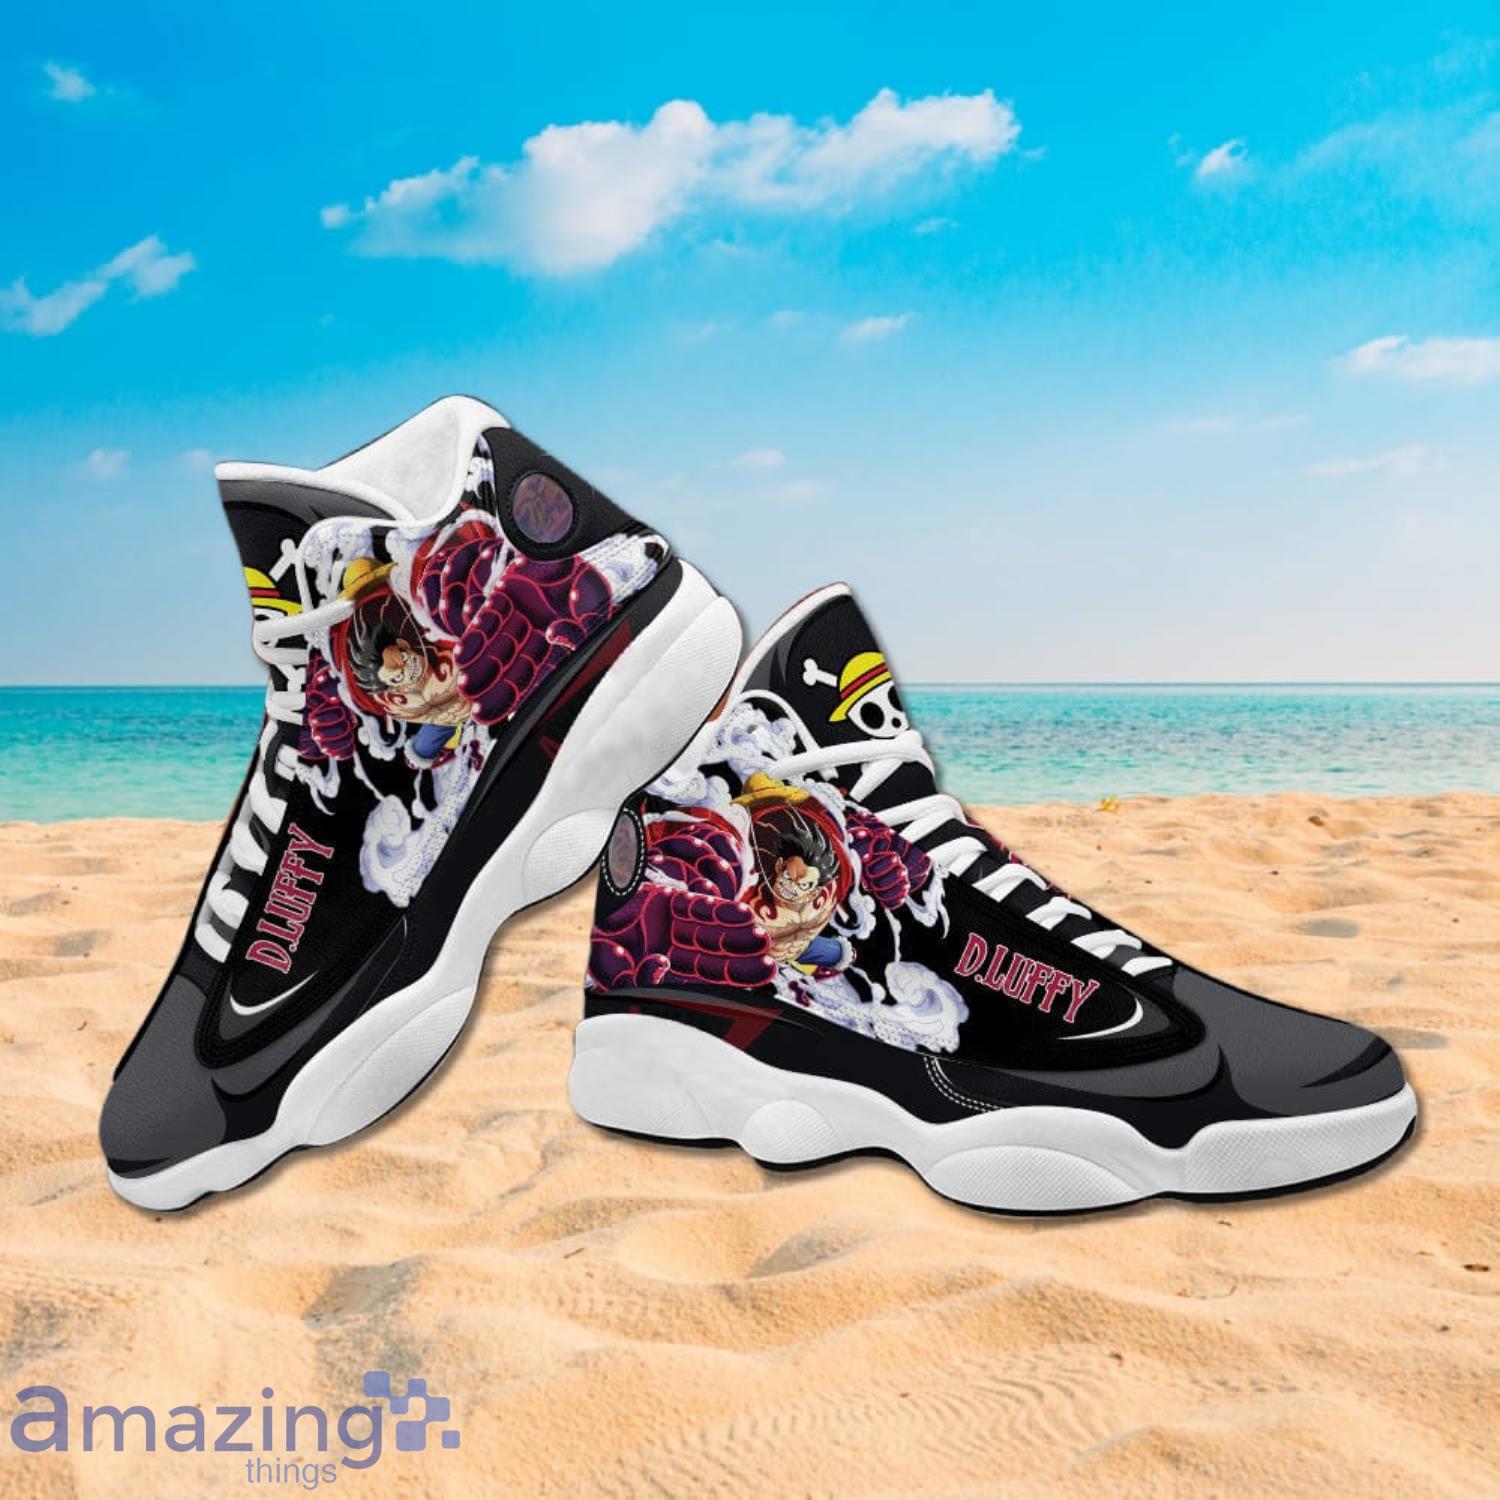 One Piece Luffy Gear 4 Air Jordan 13 Sneakers Anime Shoes Gift Fans